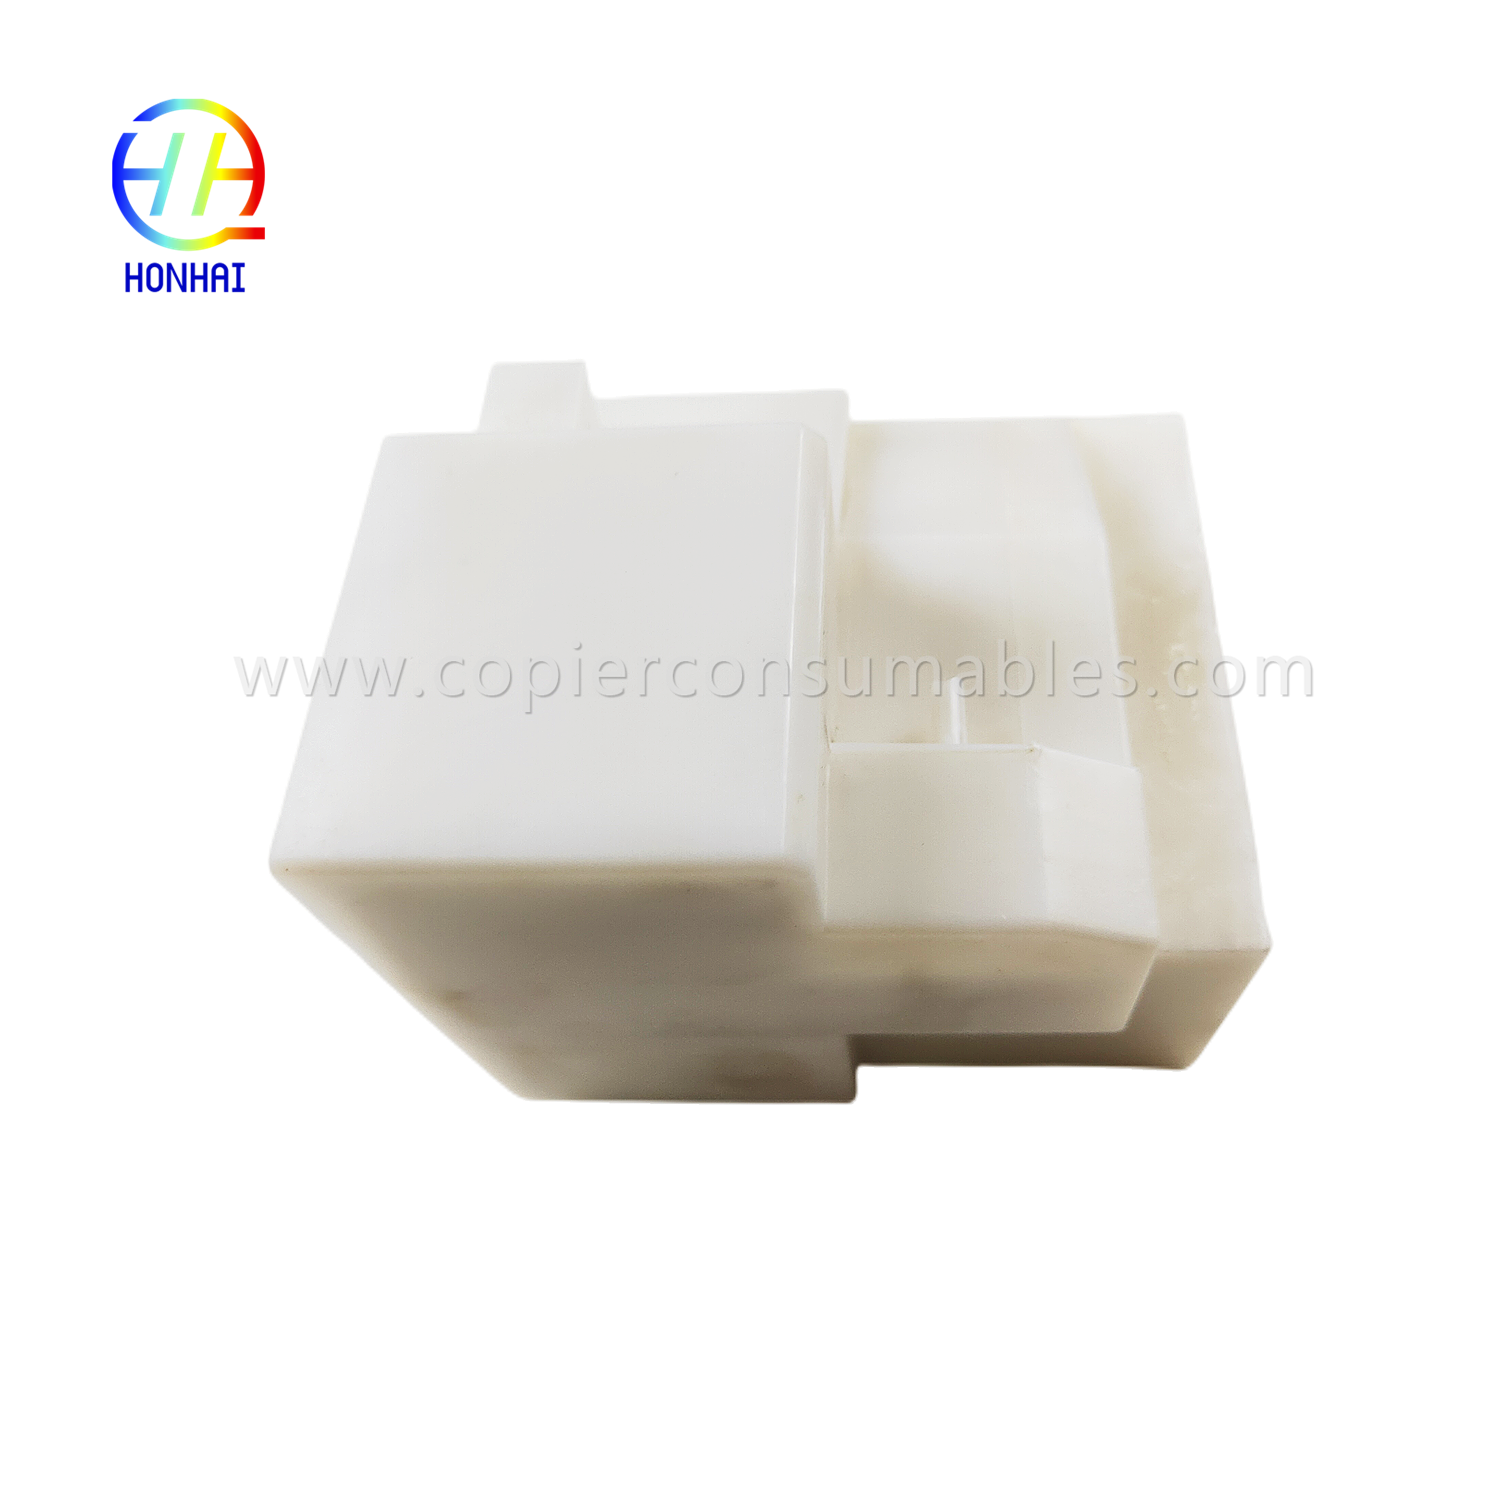 https://c585.goodo.net/waste-ink-pad-for-epson-l800-l805-l810-l850-r280-r290-product/